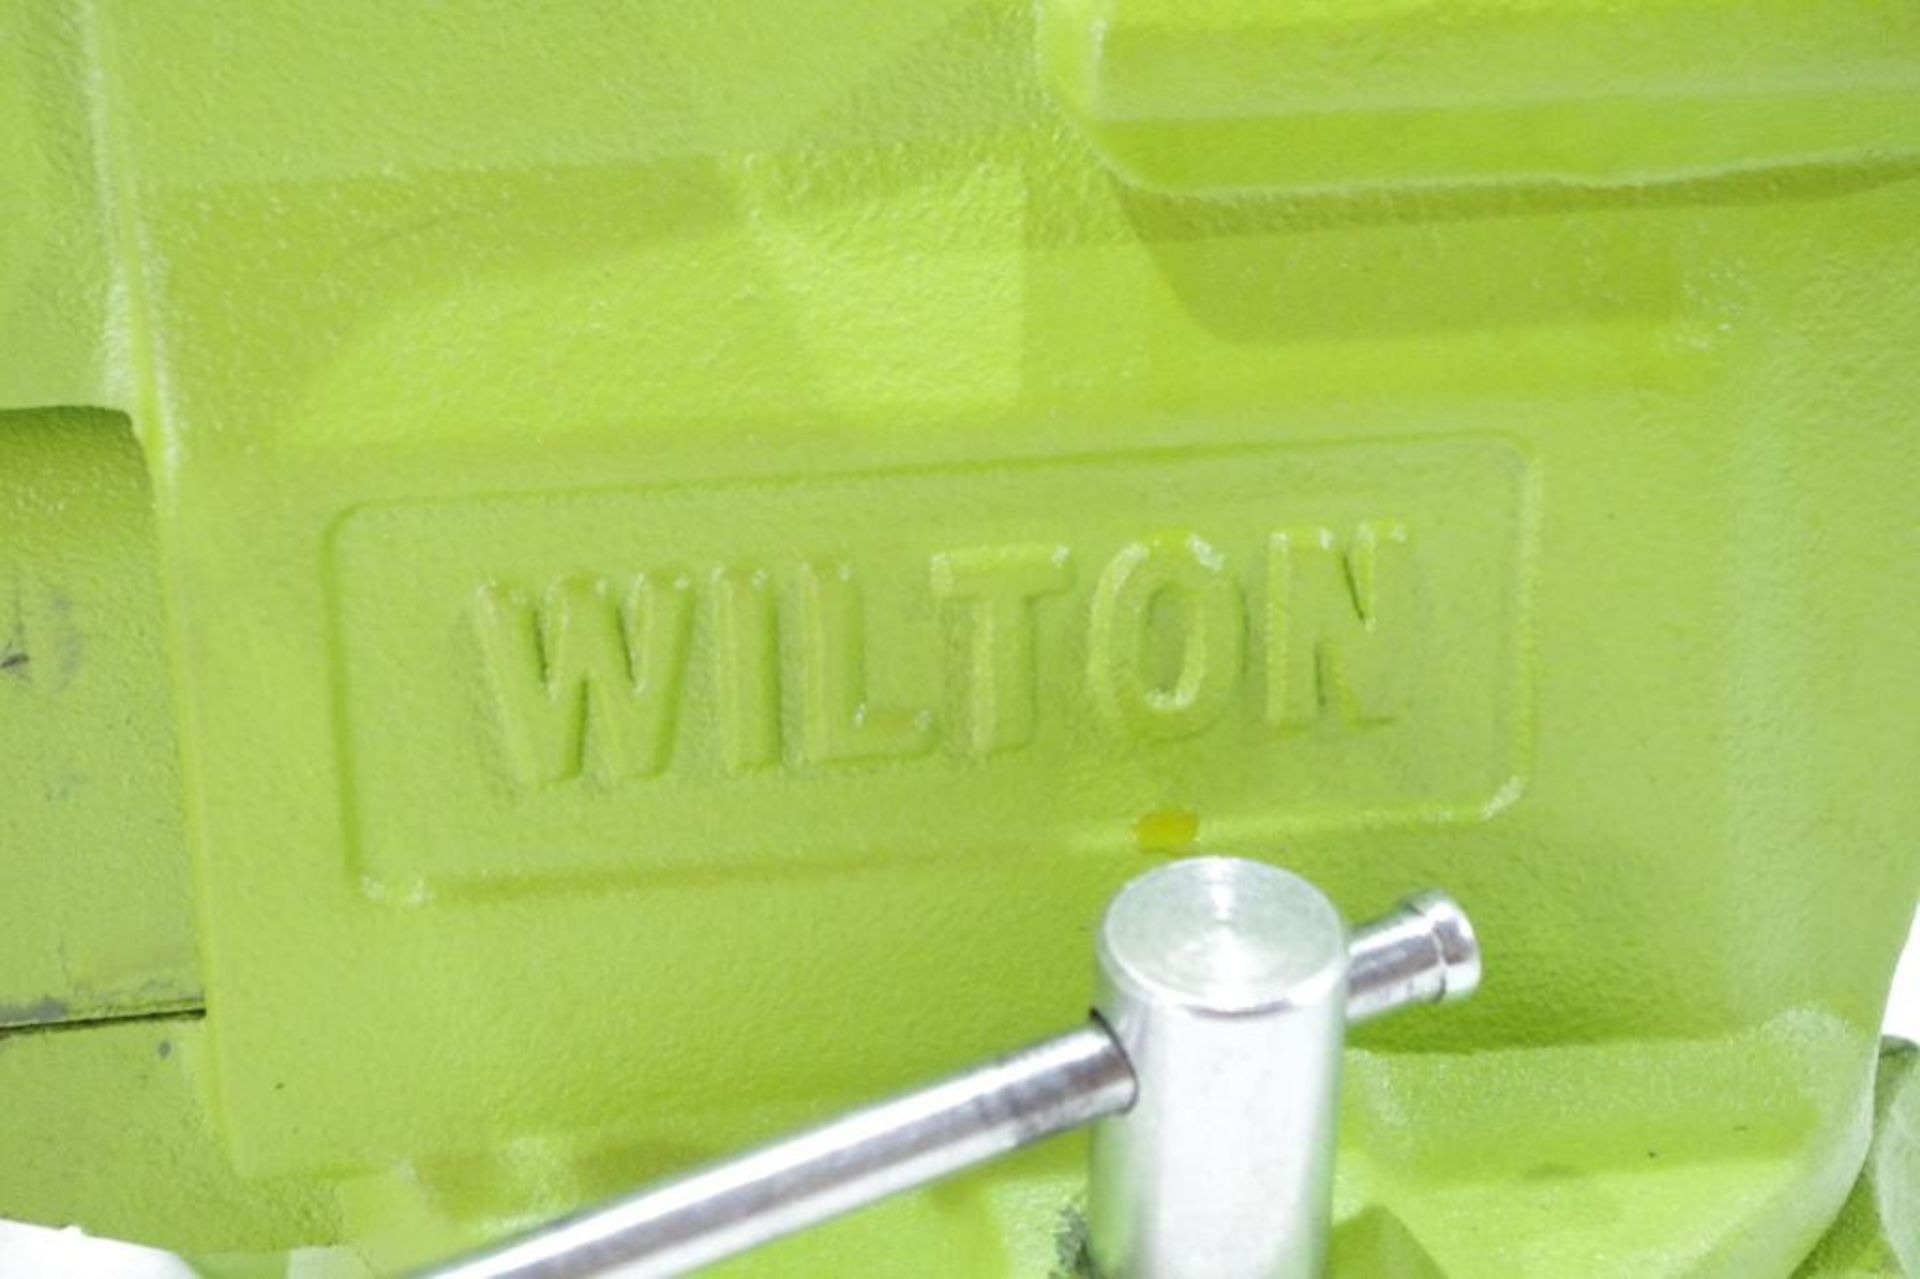 NEW WILTON B.A.S.H. 6.5" Utility Vise w/ Swivel Base, Pipe Jaws & Anvil Work Surface - Image 5 of 5